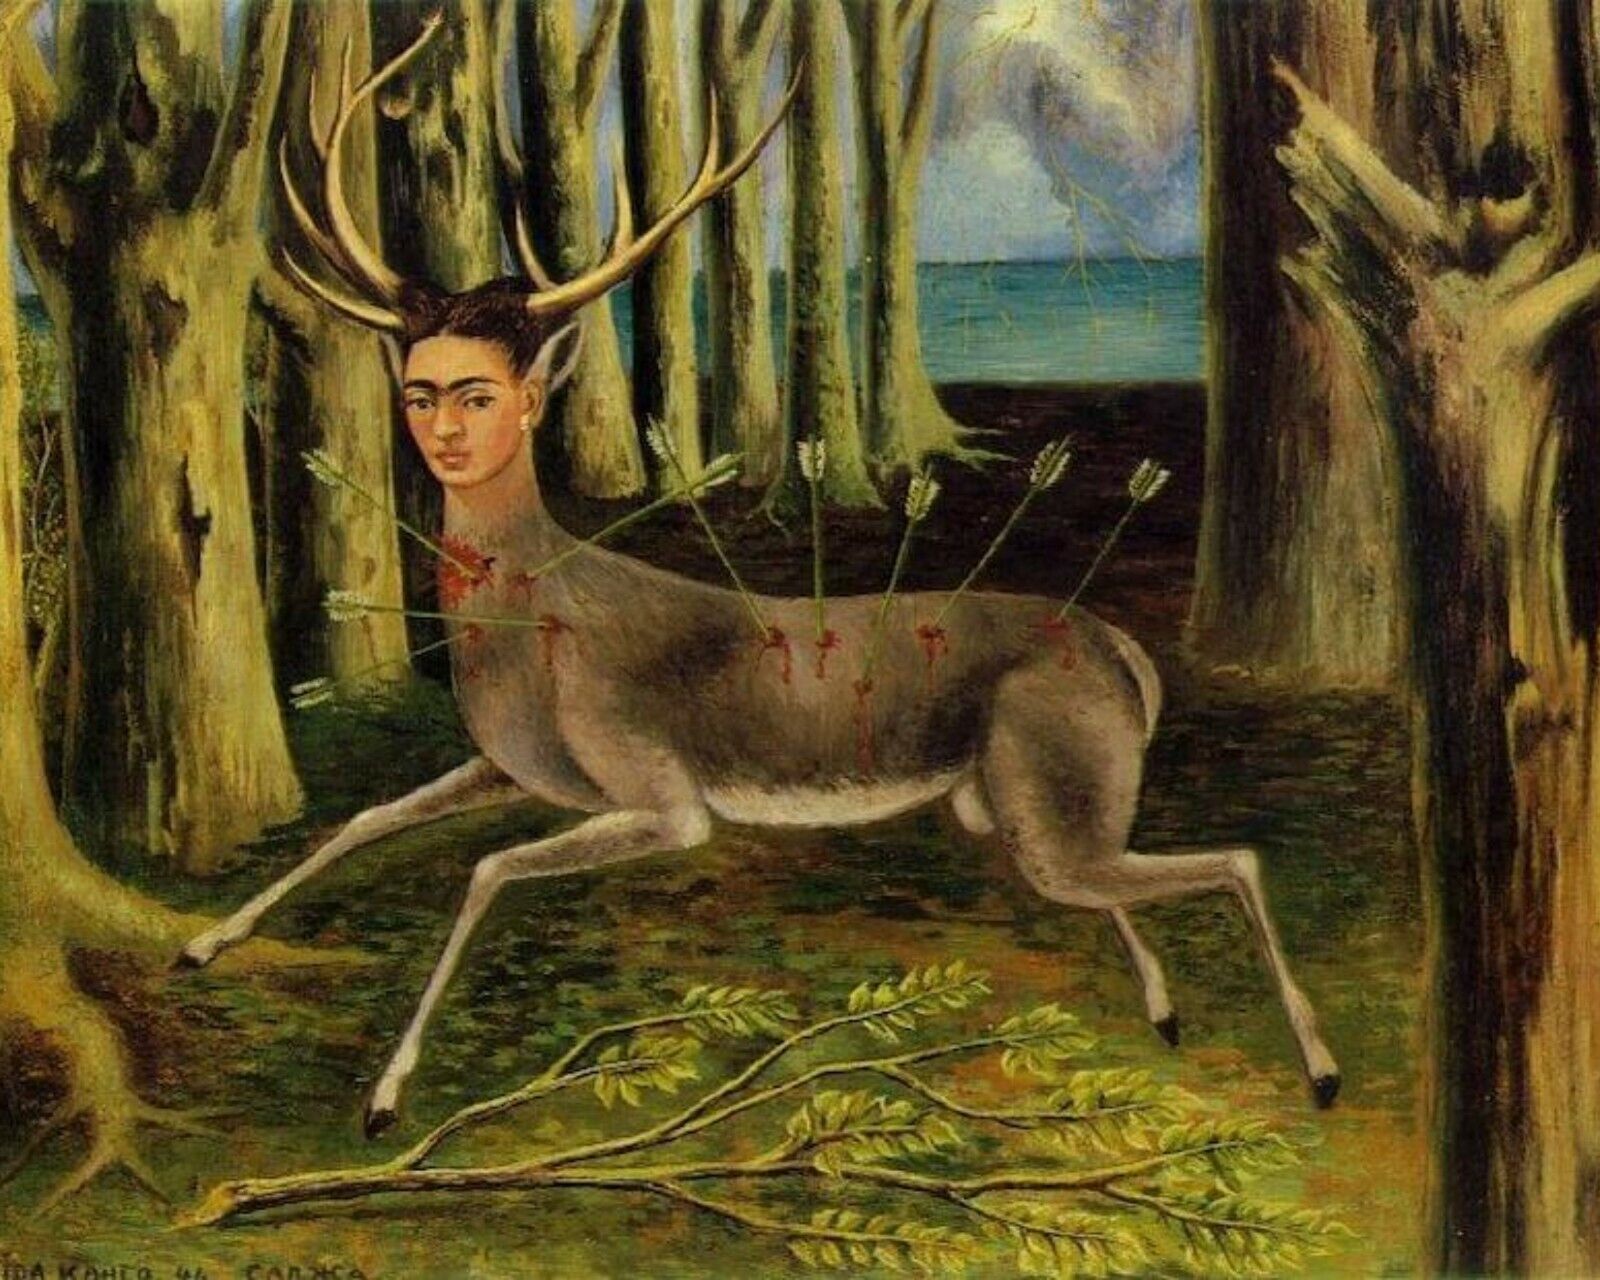 Print - The Wounded Deer, 1946 by Frida Kahlo Без бренда